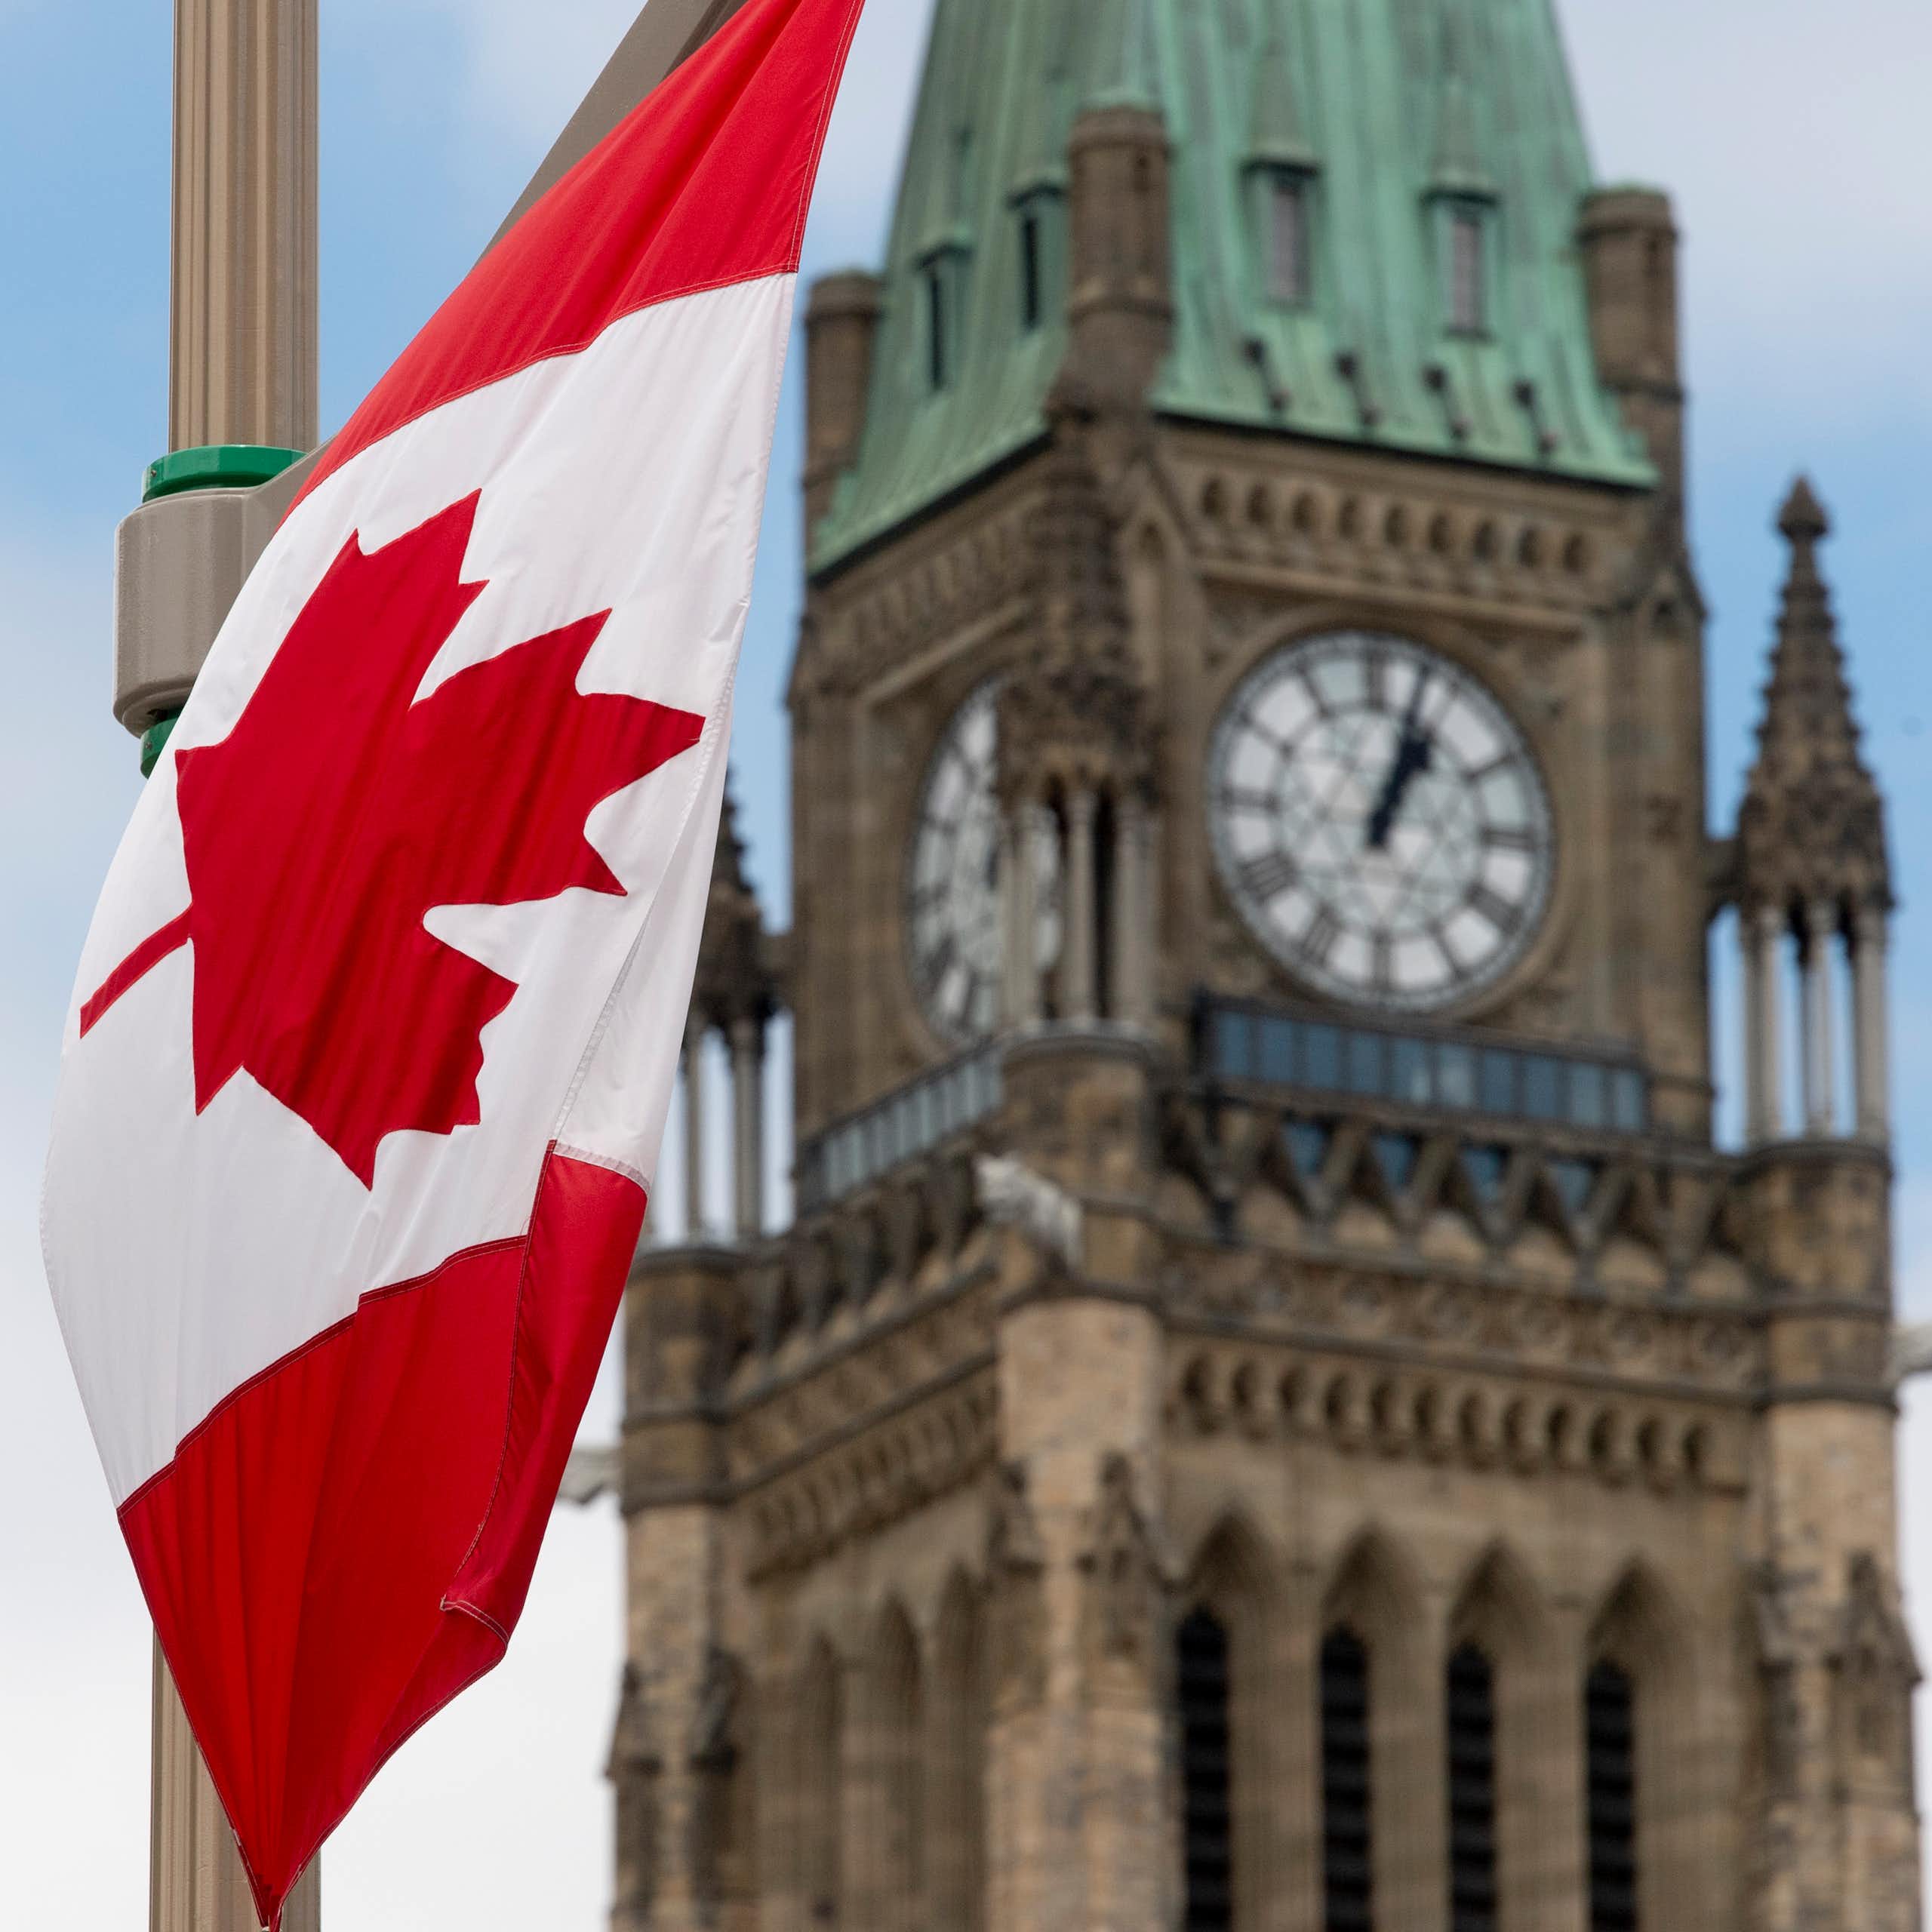 A Canadian flag hands in front of a clock tower